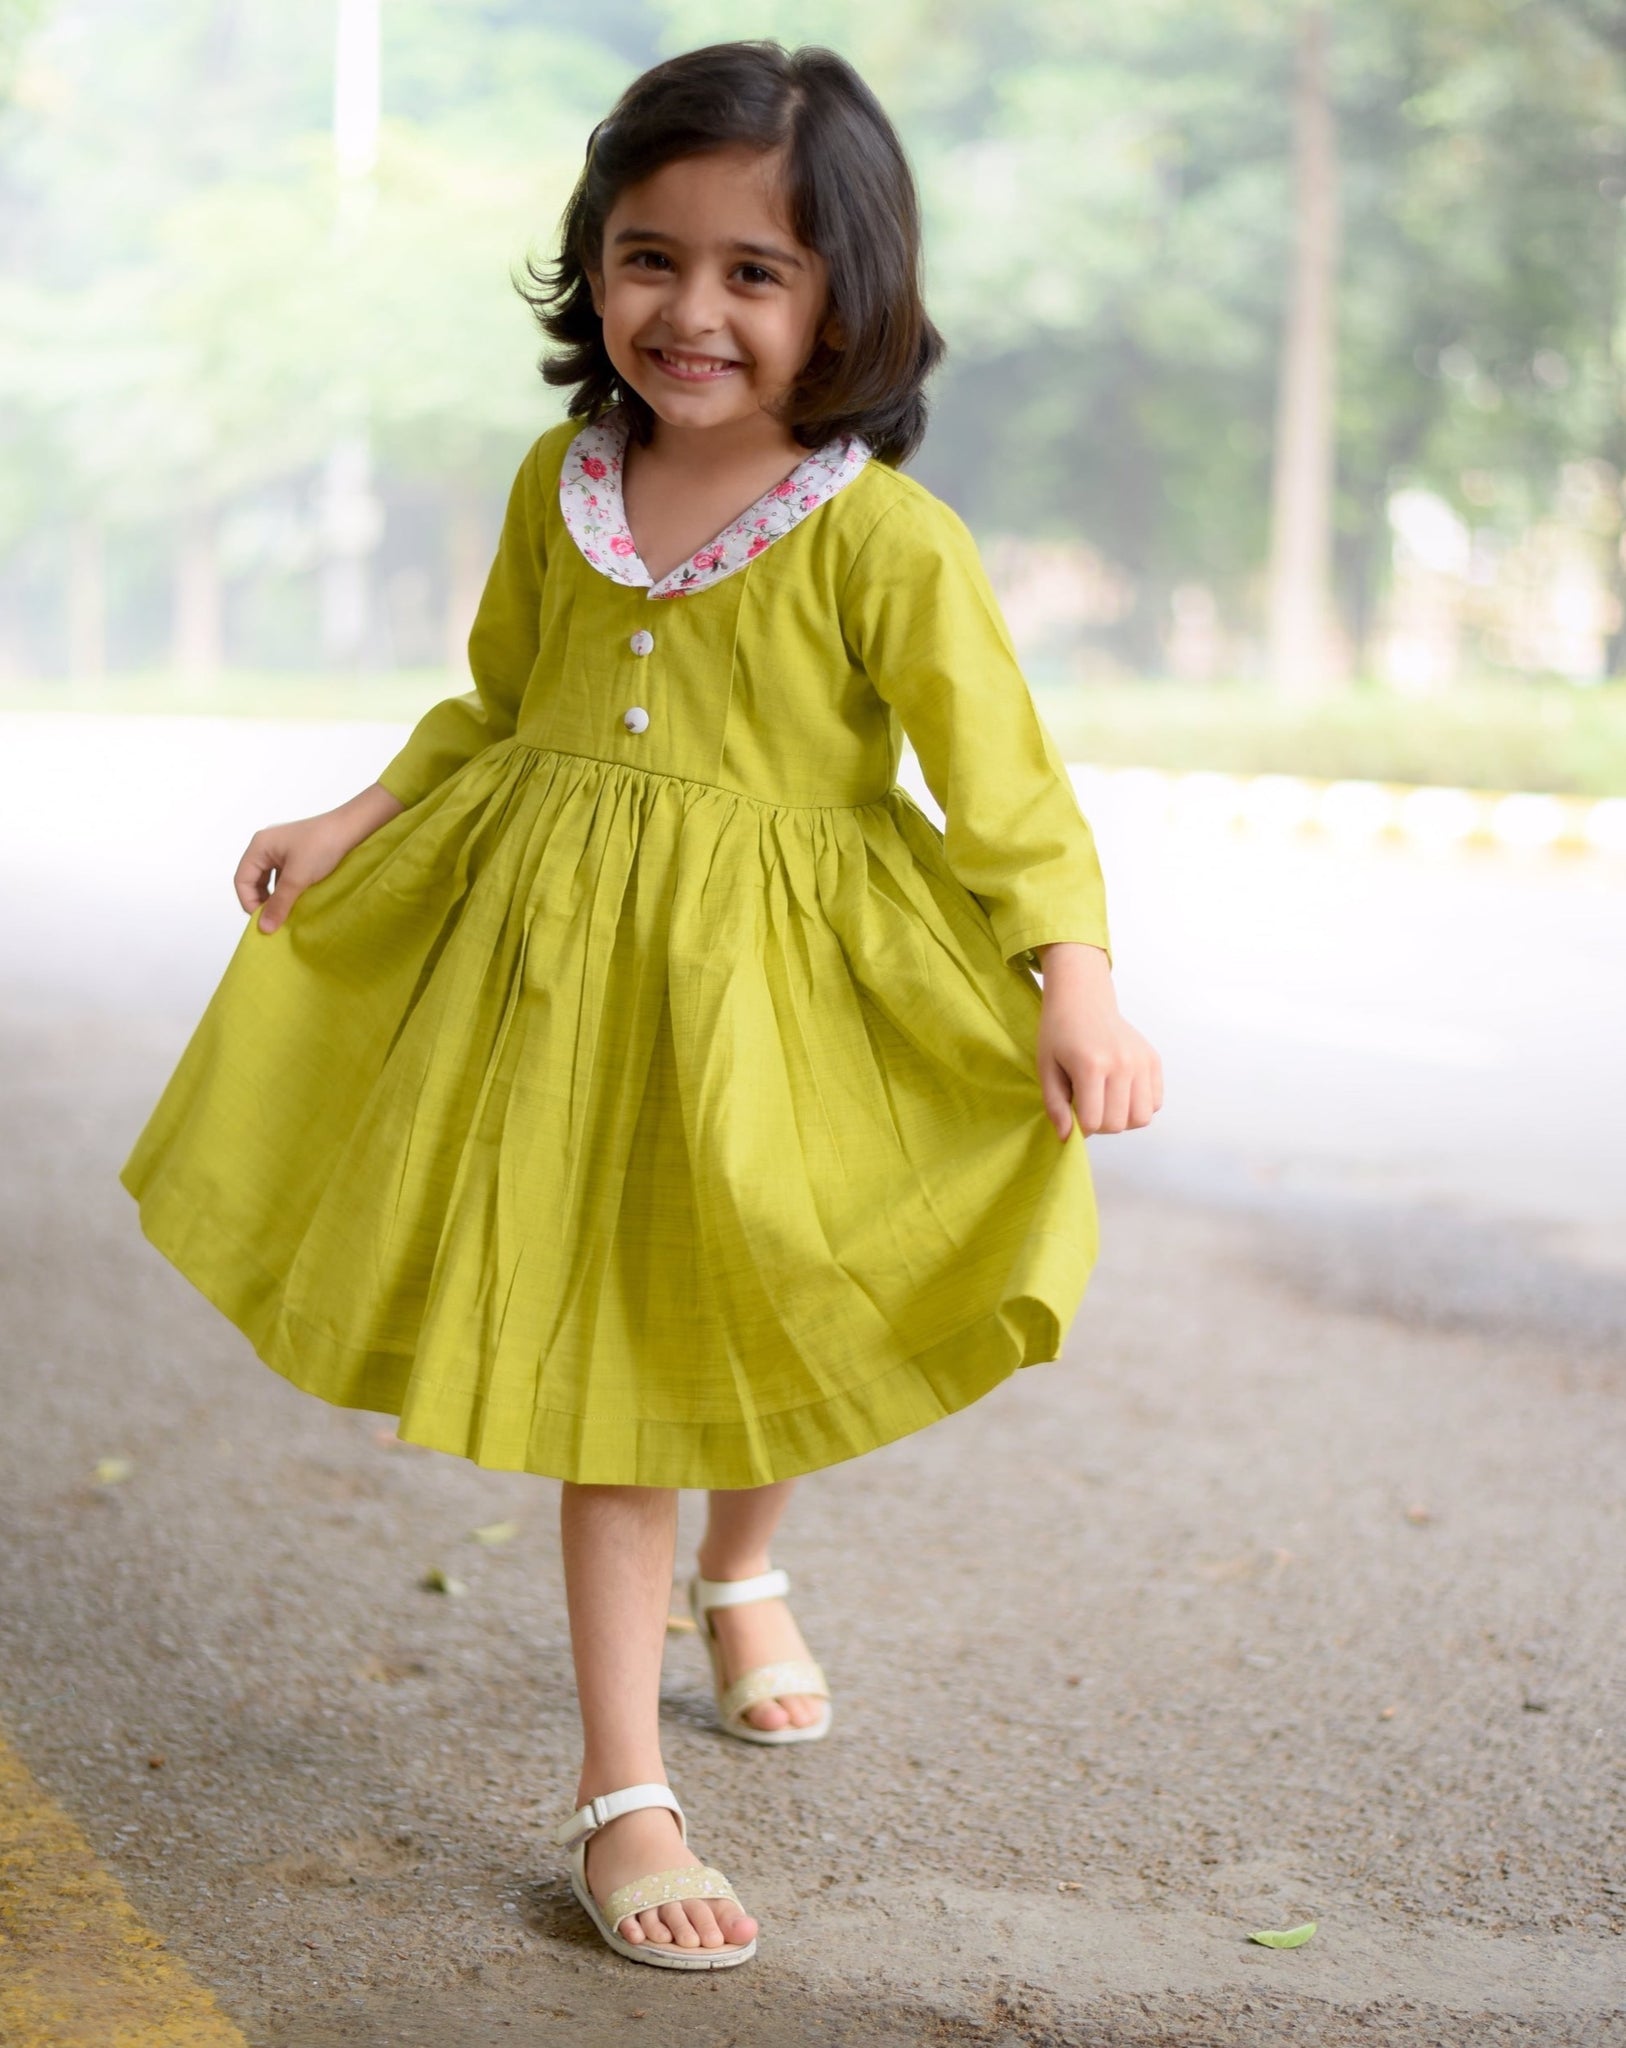 Kids Girls Fit And Flare Dress|2-3 Years Kids Dress|3-4 Years